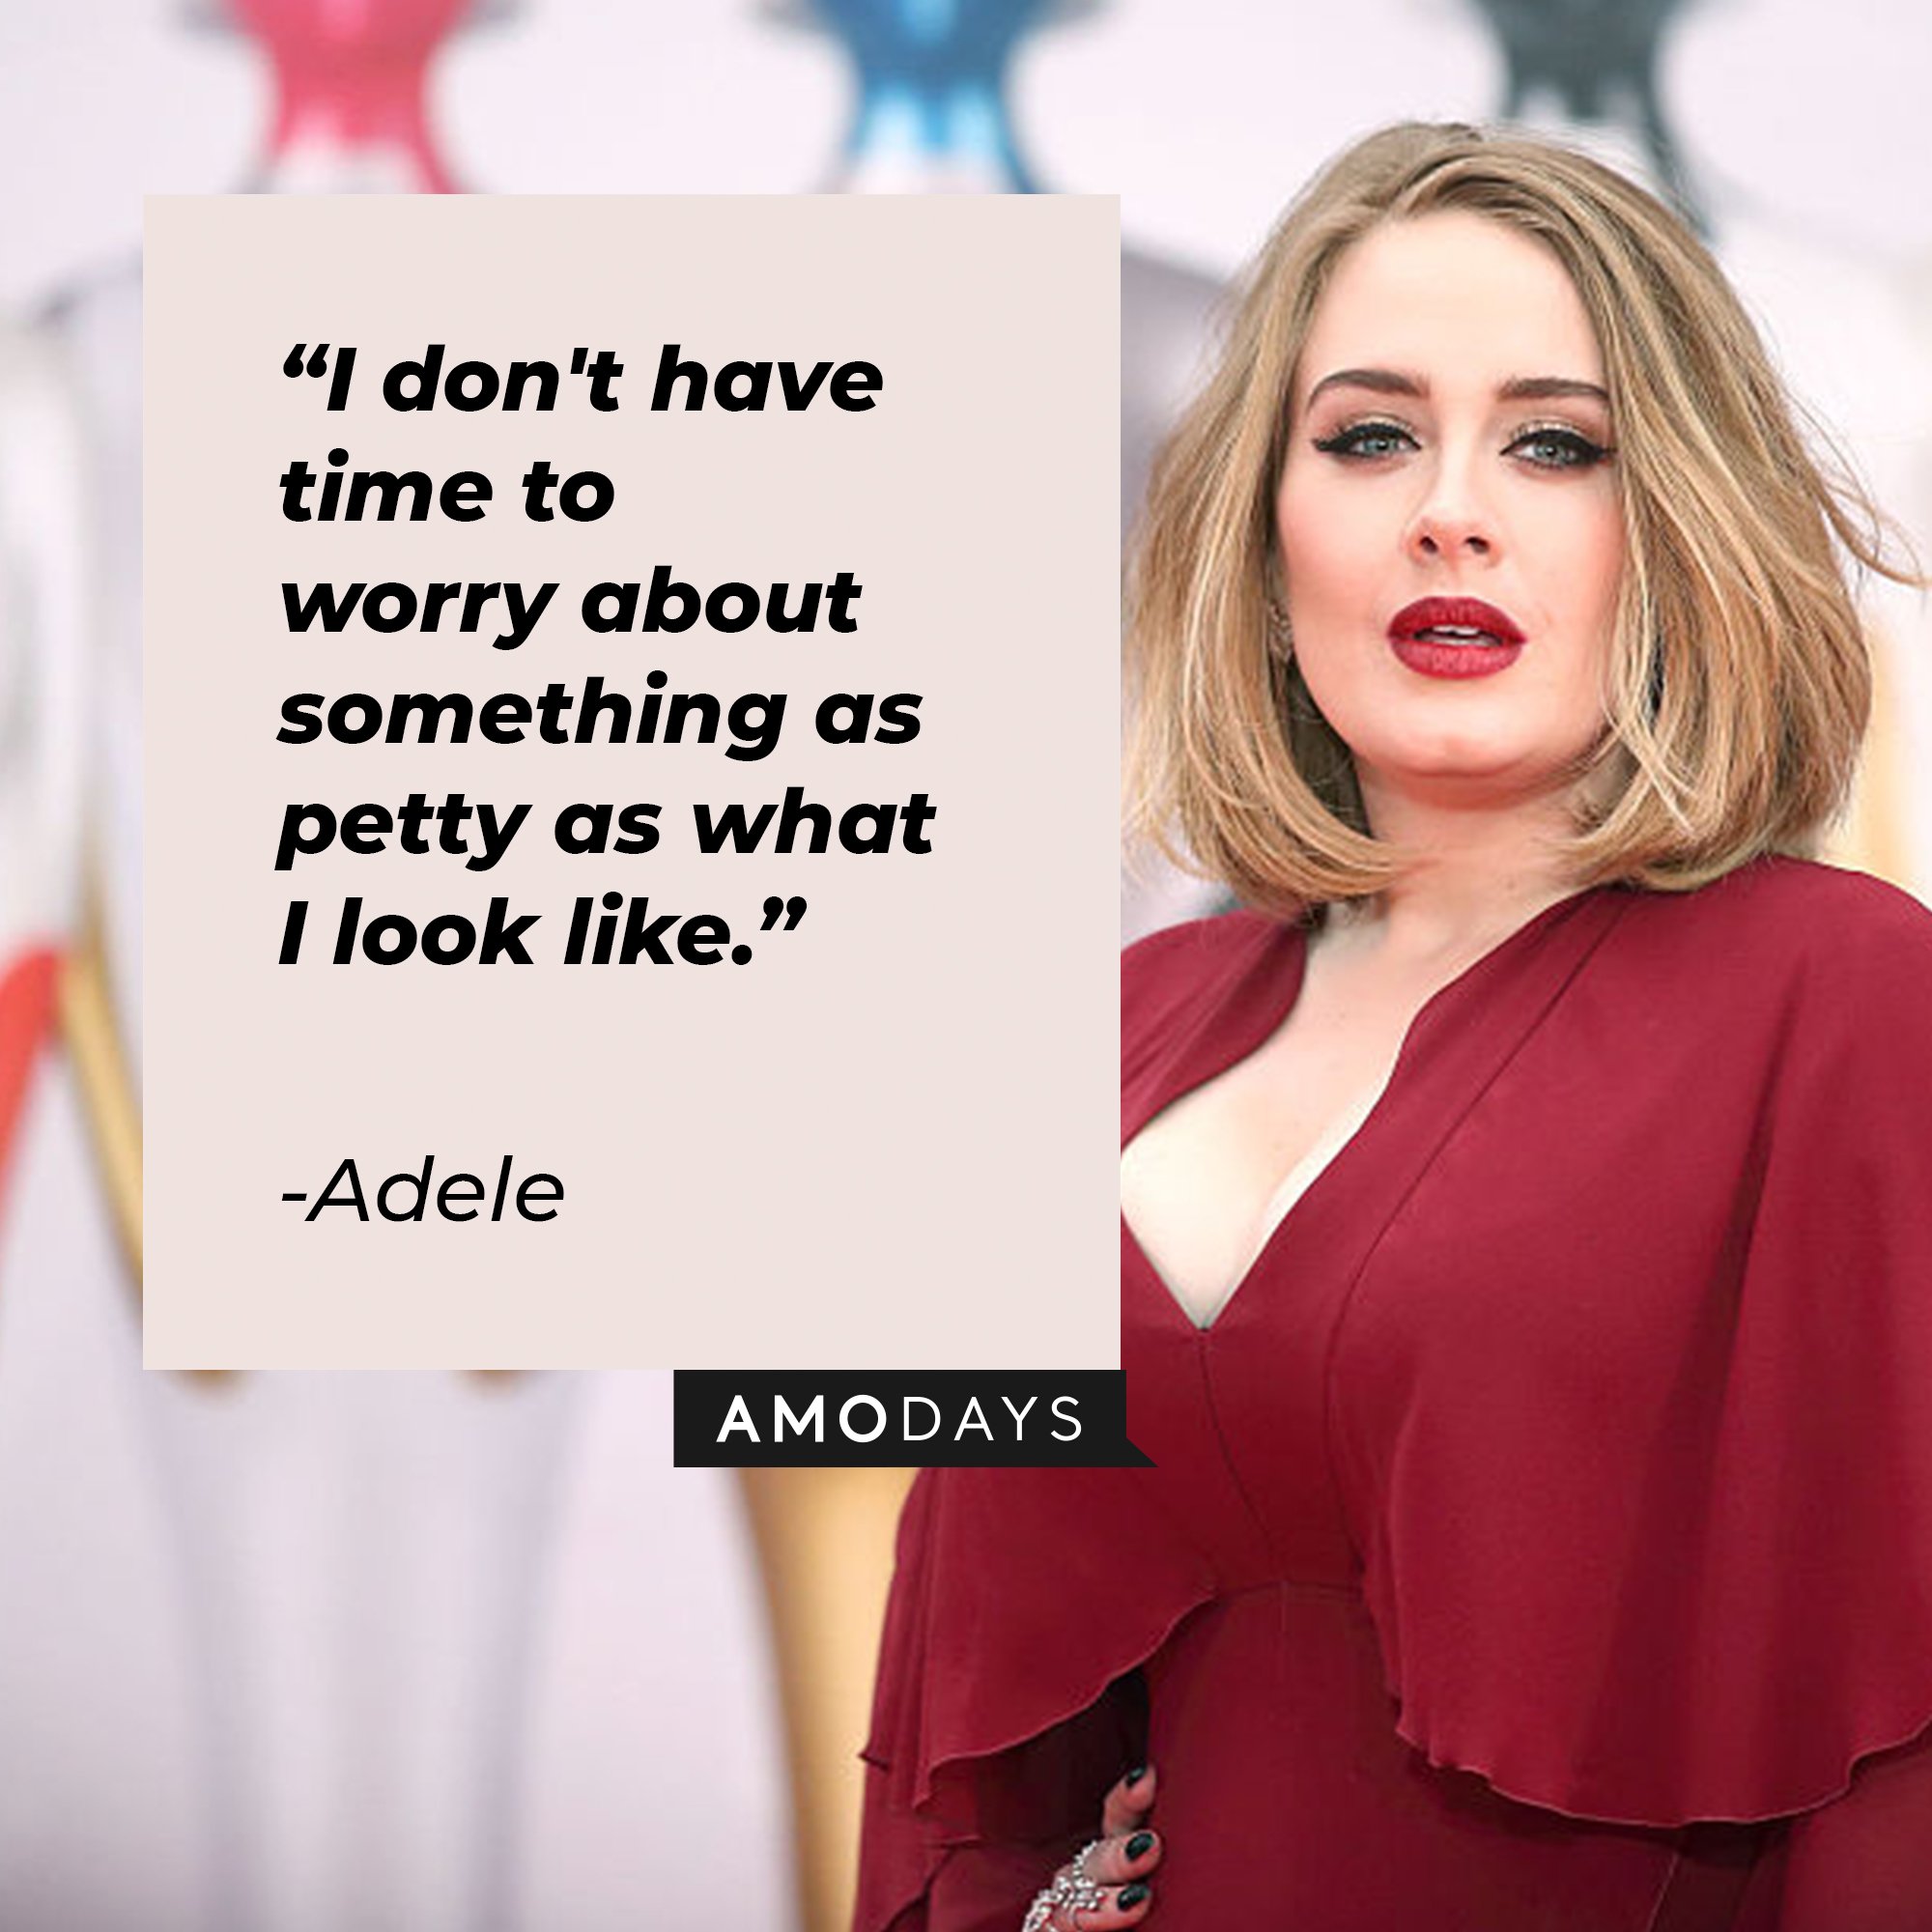 Adele’s quote: "I don't have time to worry about something as petty as what I look like." |  Image: AmoDays